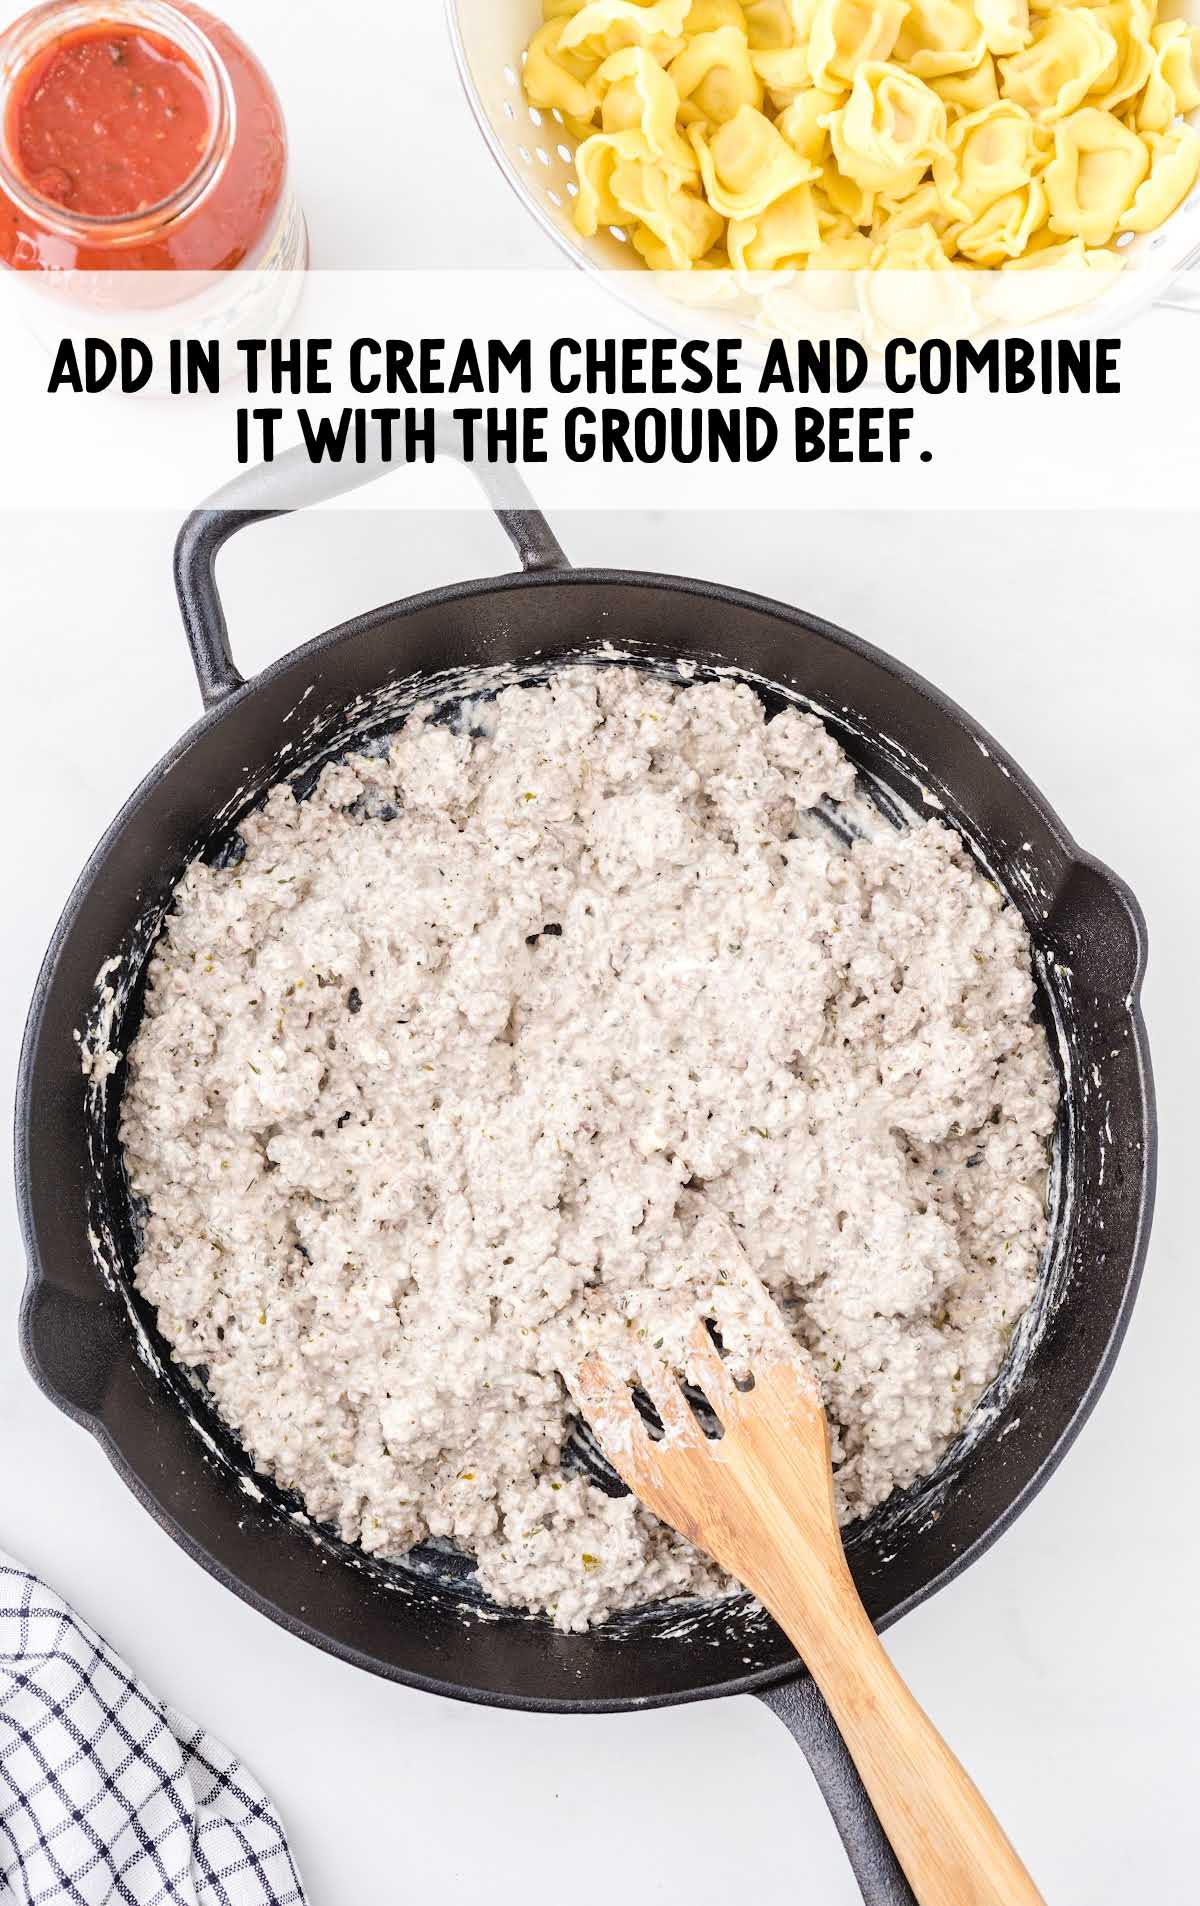 cream cheese being added to ground beef in a skillet